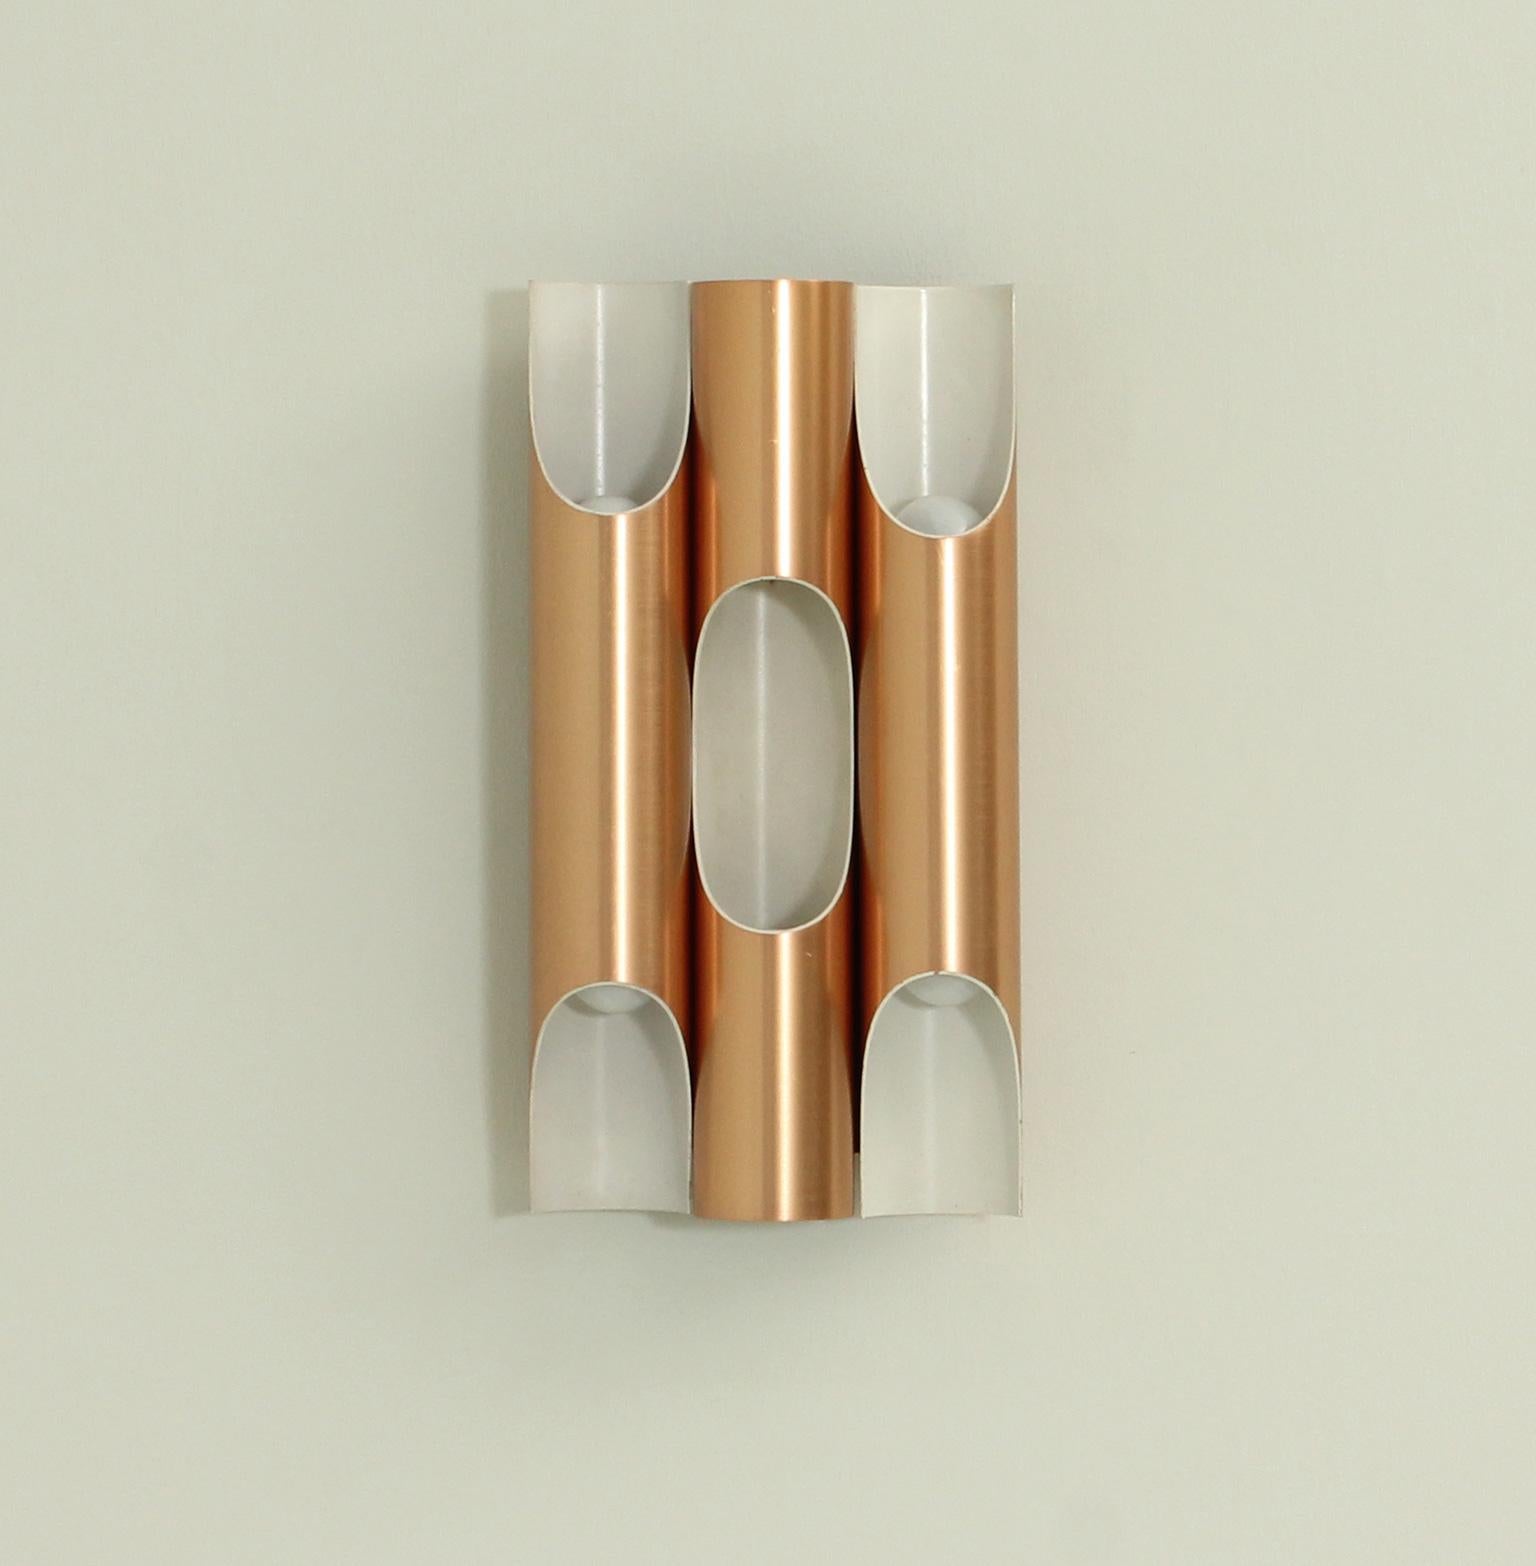 Fuga triple sconce designed in 1960's by Maija Liisa Komulainen for Raak, The Netherlands. Polished cooper with white lacquered interior, six bulbs.